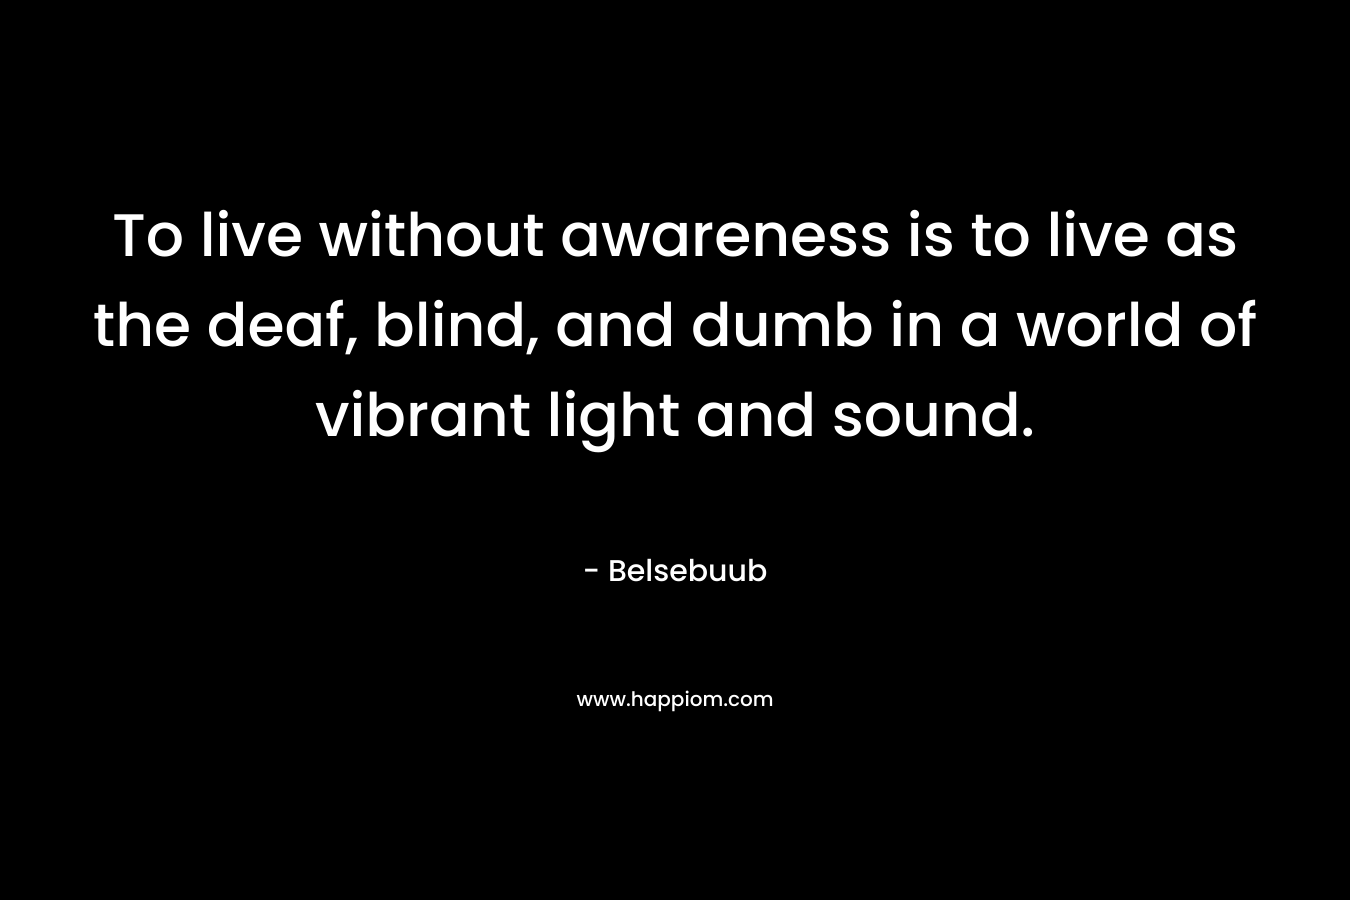 To live without awareness is to live as the deaf, blind, and dumb in a world of vibrant light and sound.